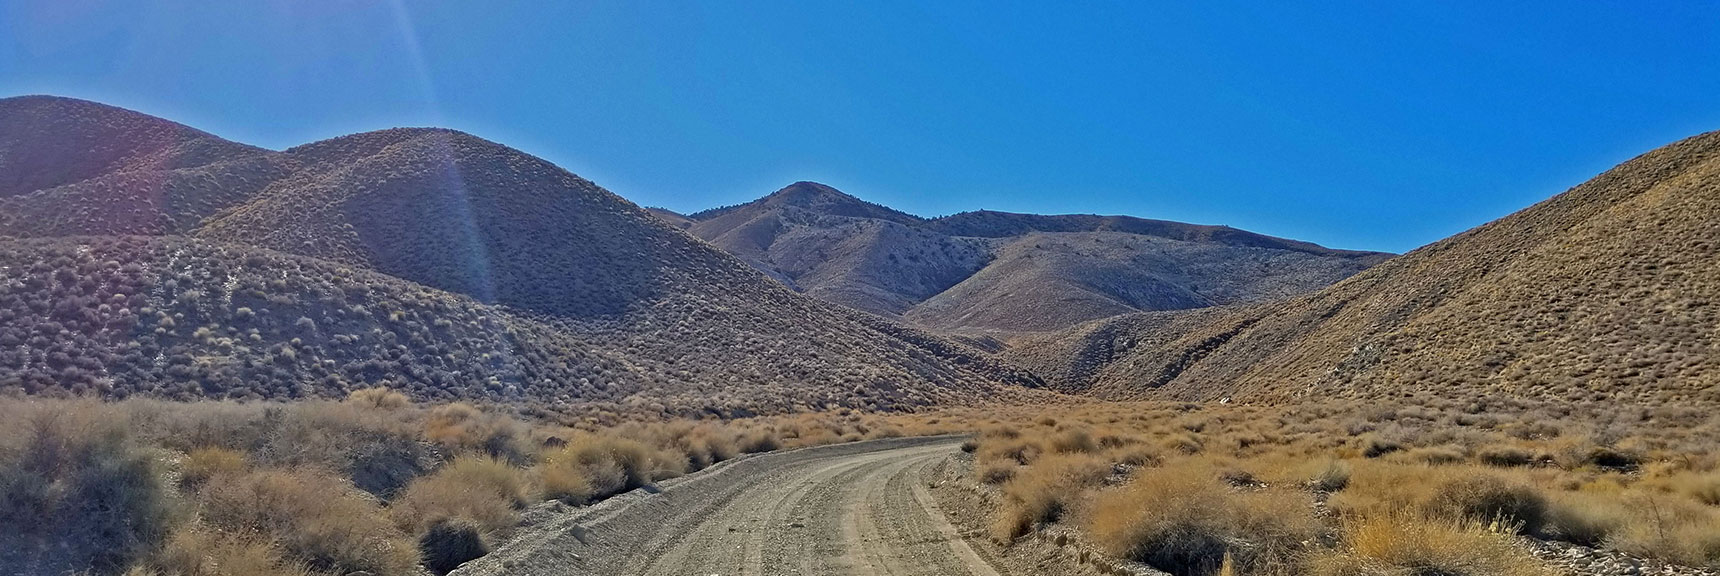 Approach Canyon to Aguereberry Point Ahead | Aguereberry Point | Panamint Mountain Range | Death Valley National Park, California